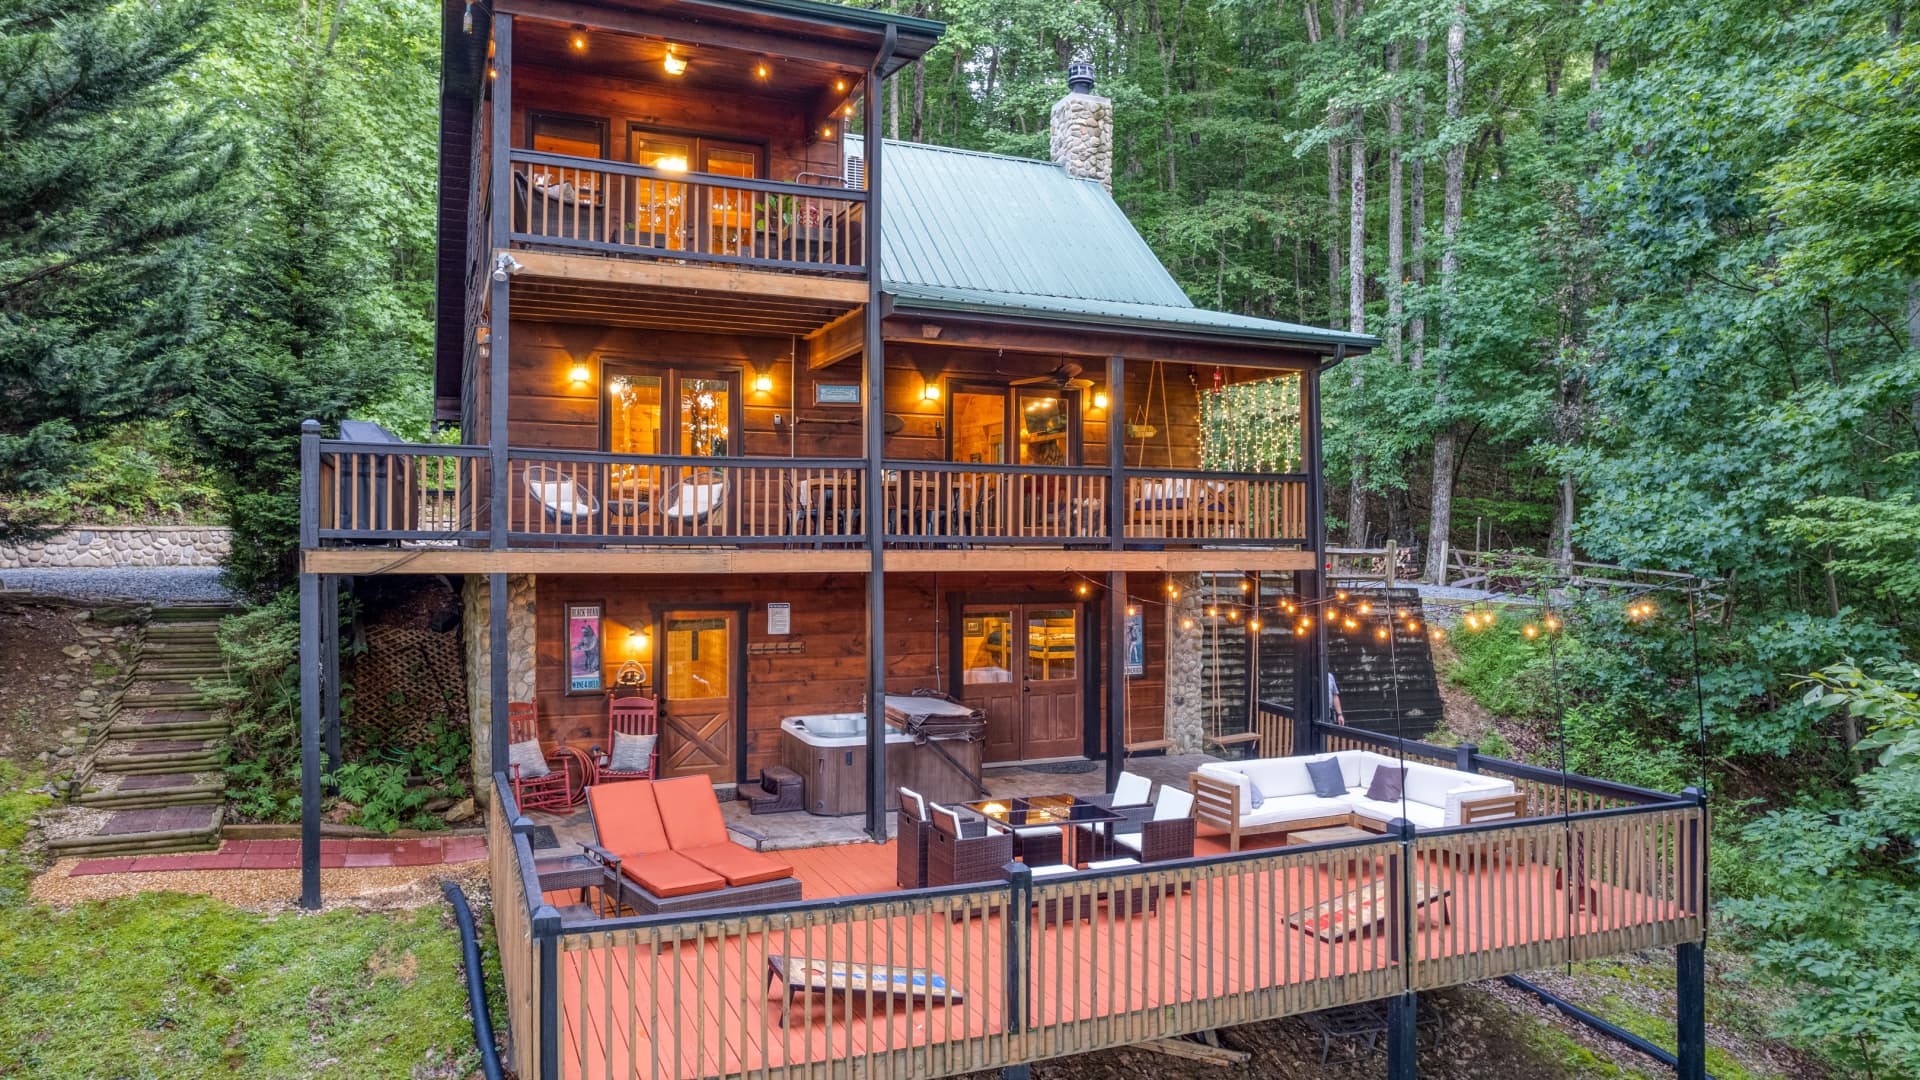 This cabin at Highlands Hideaway in Blue Ridge, Georgia features three bedrooms and three full bathrooms.